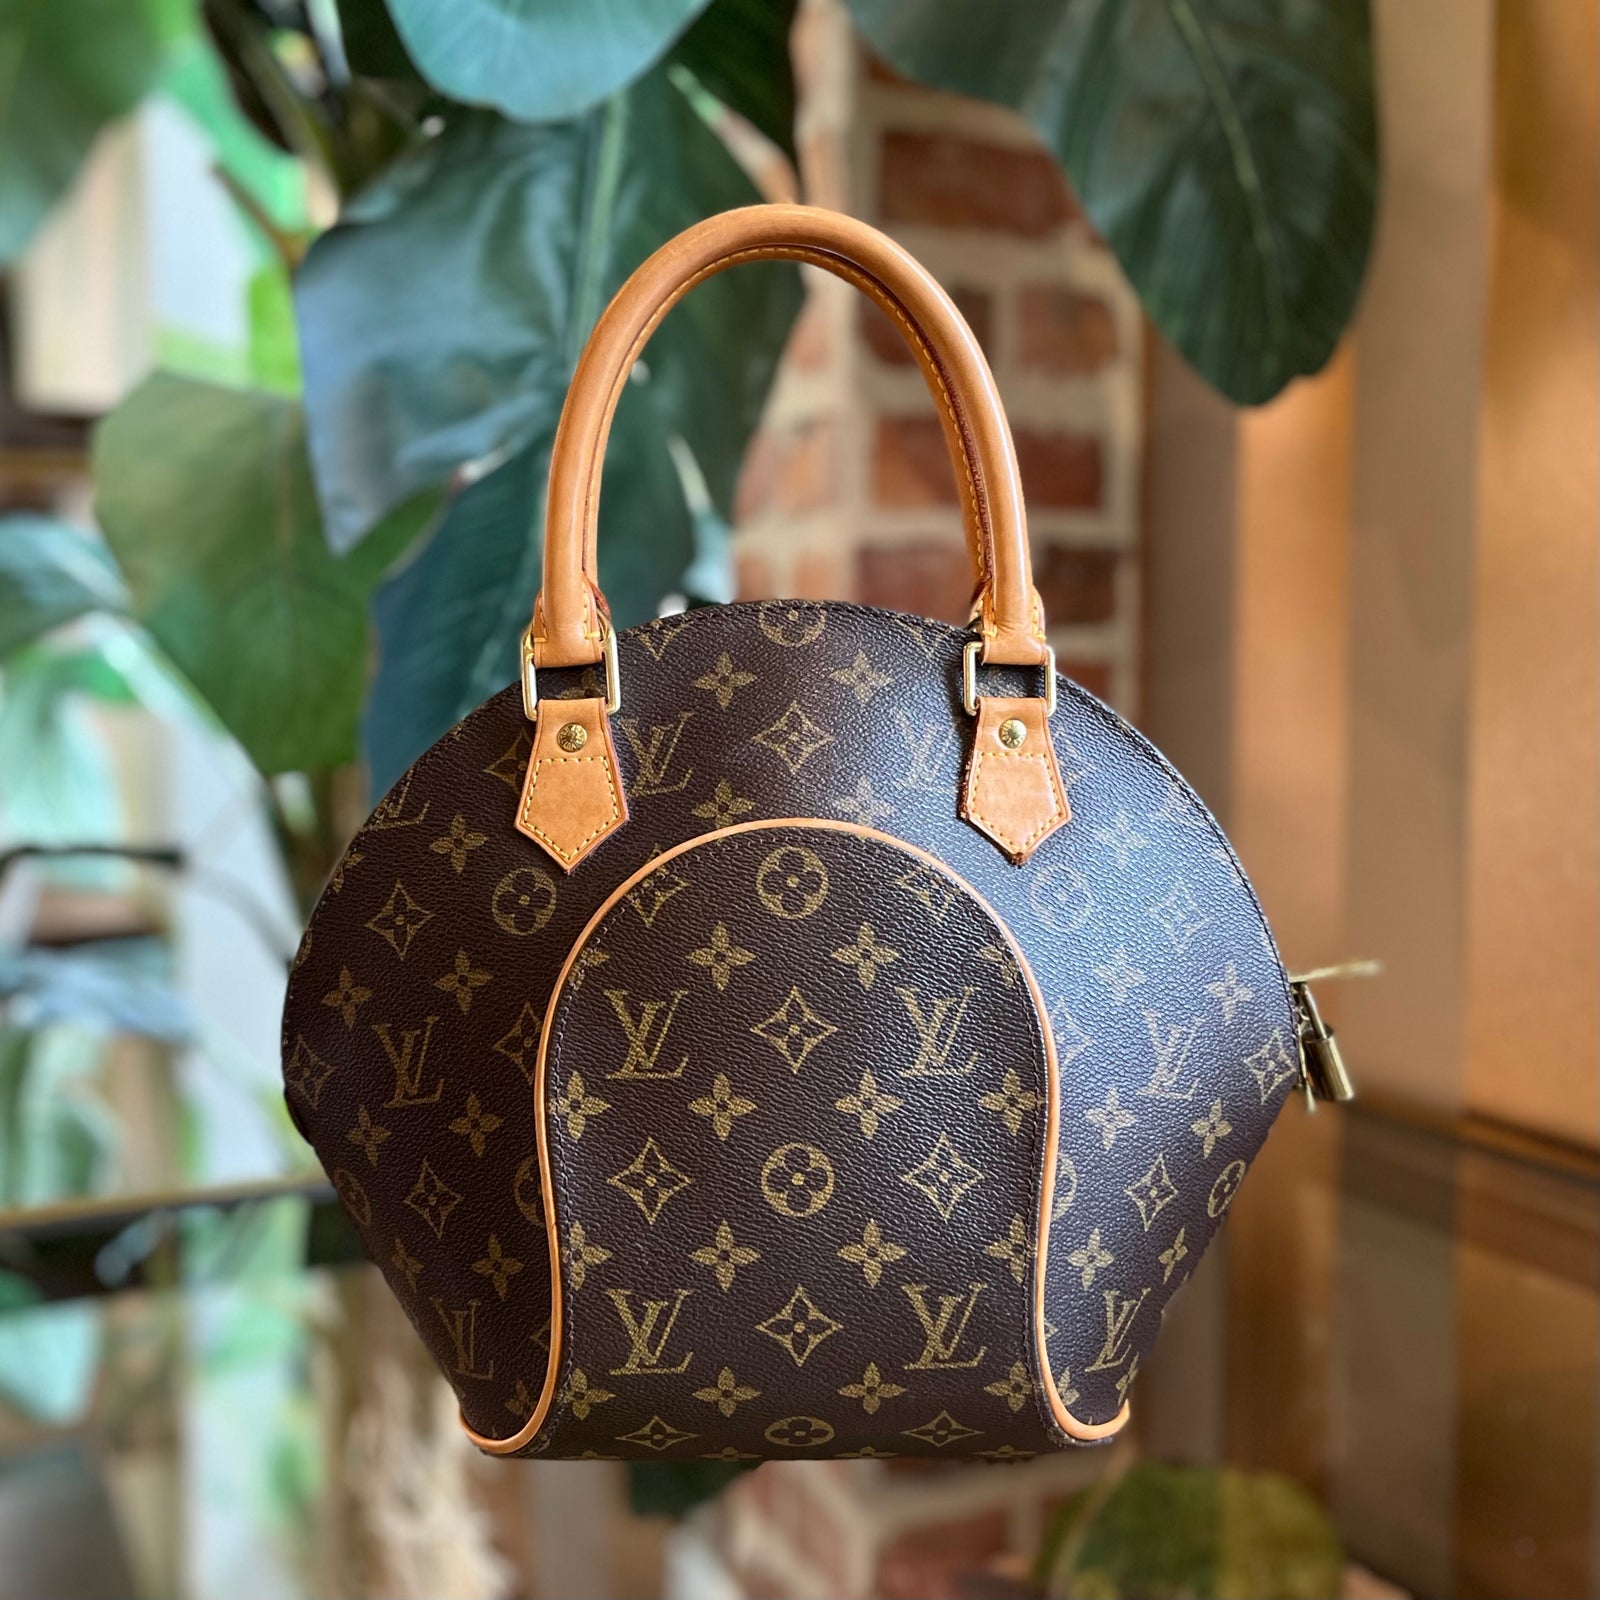 Authentic, Pre-Owned Louis Vuitton Alma PM - Epi Leather in Sapphire